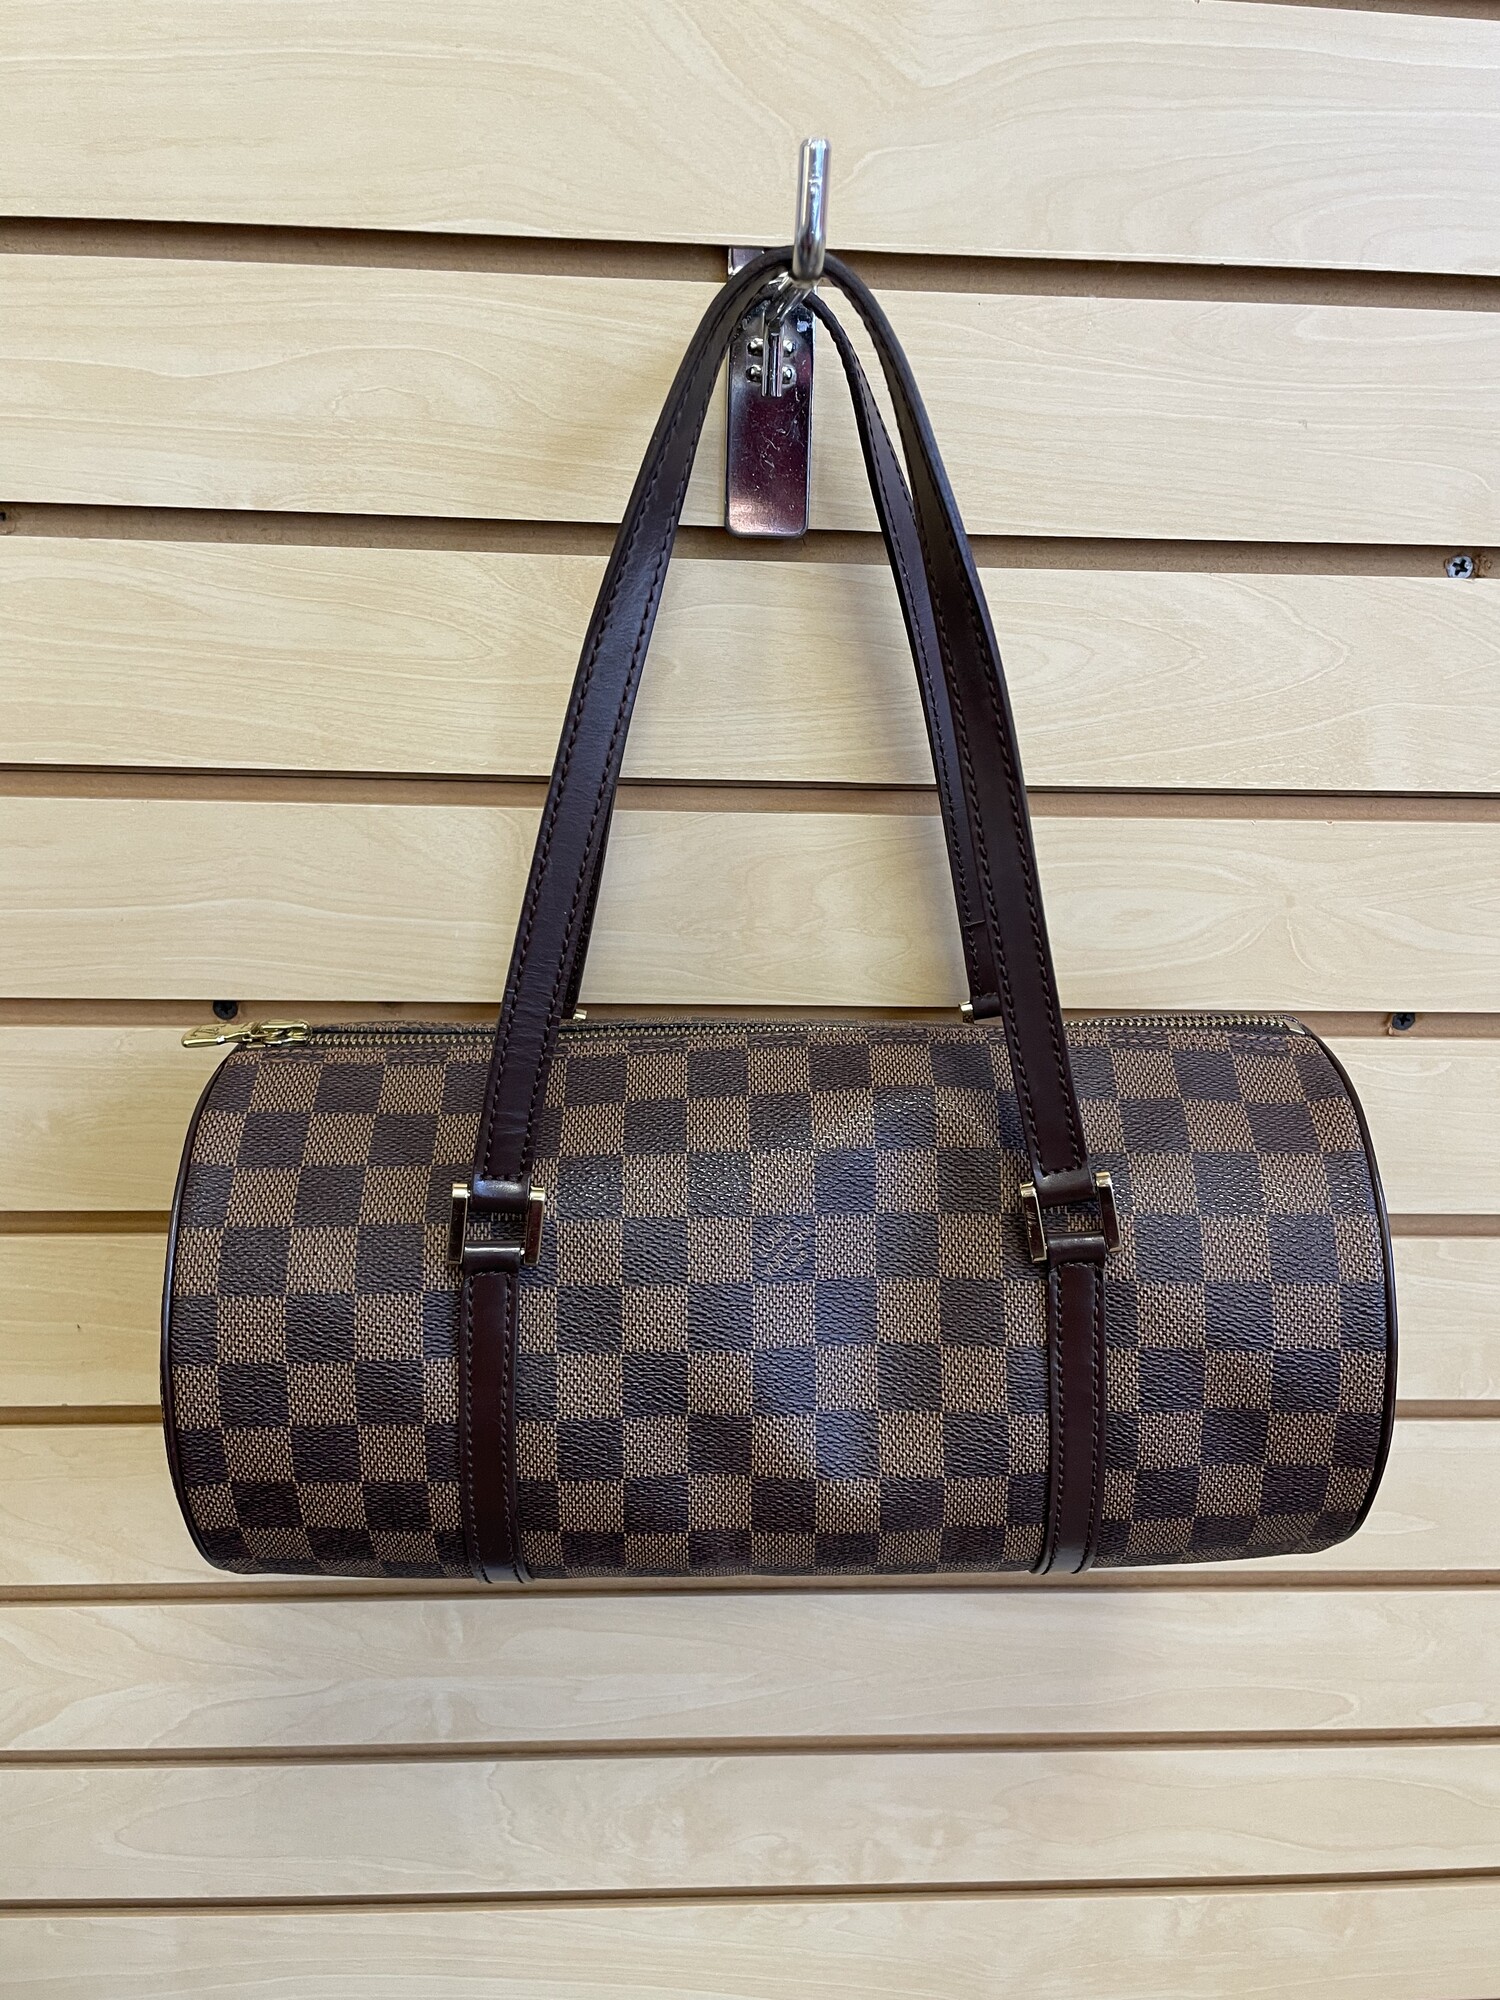 Louis Vuitton Papillon Handbag, Damier, Brown Coated Canvas Check Pattern with Rust Leather Lining, Brown Leather Straps, Some Water Stains on Inside of Straps, Gold Hardware

Size: Width: 12 inches, Height: 6 inches, Diameter: 6 inches, Handle Drop: 7 inches